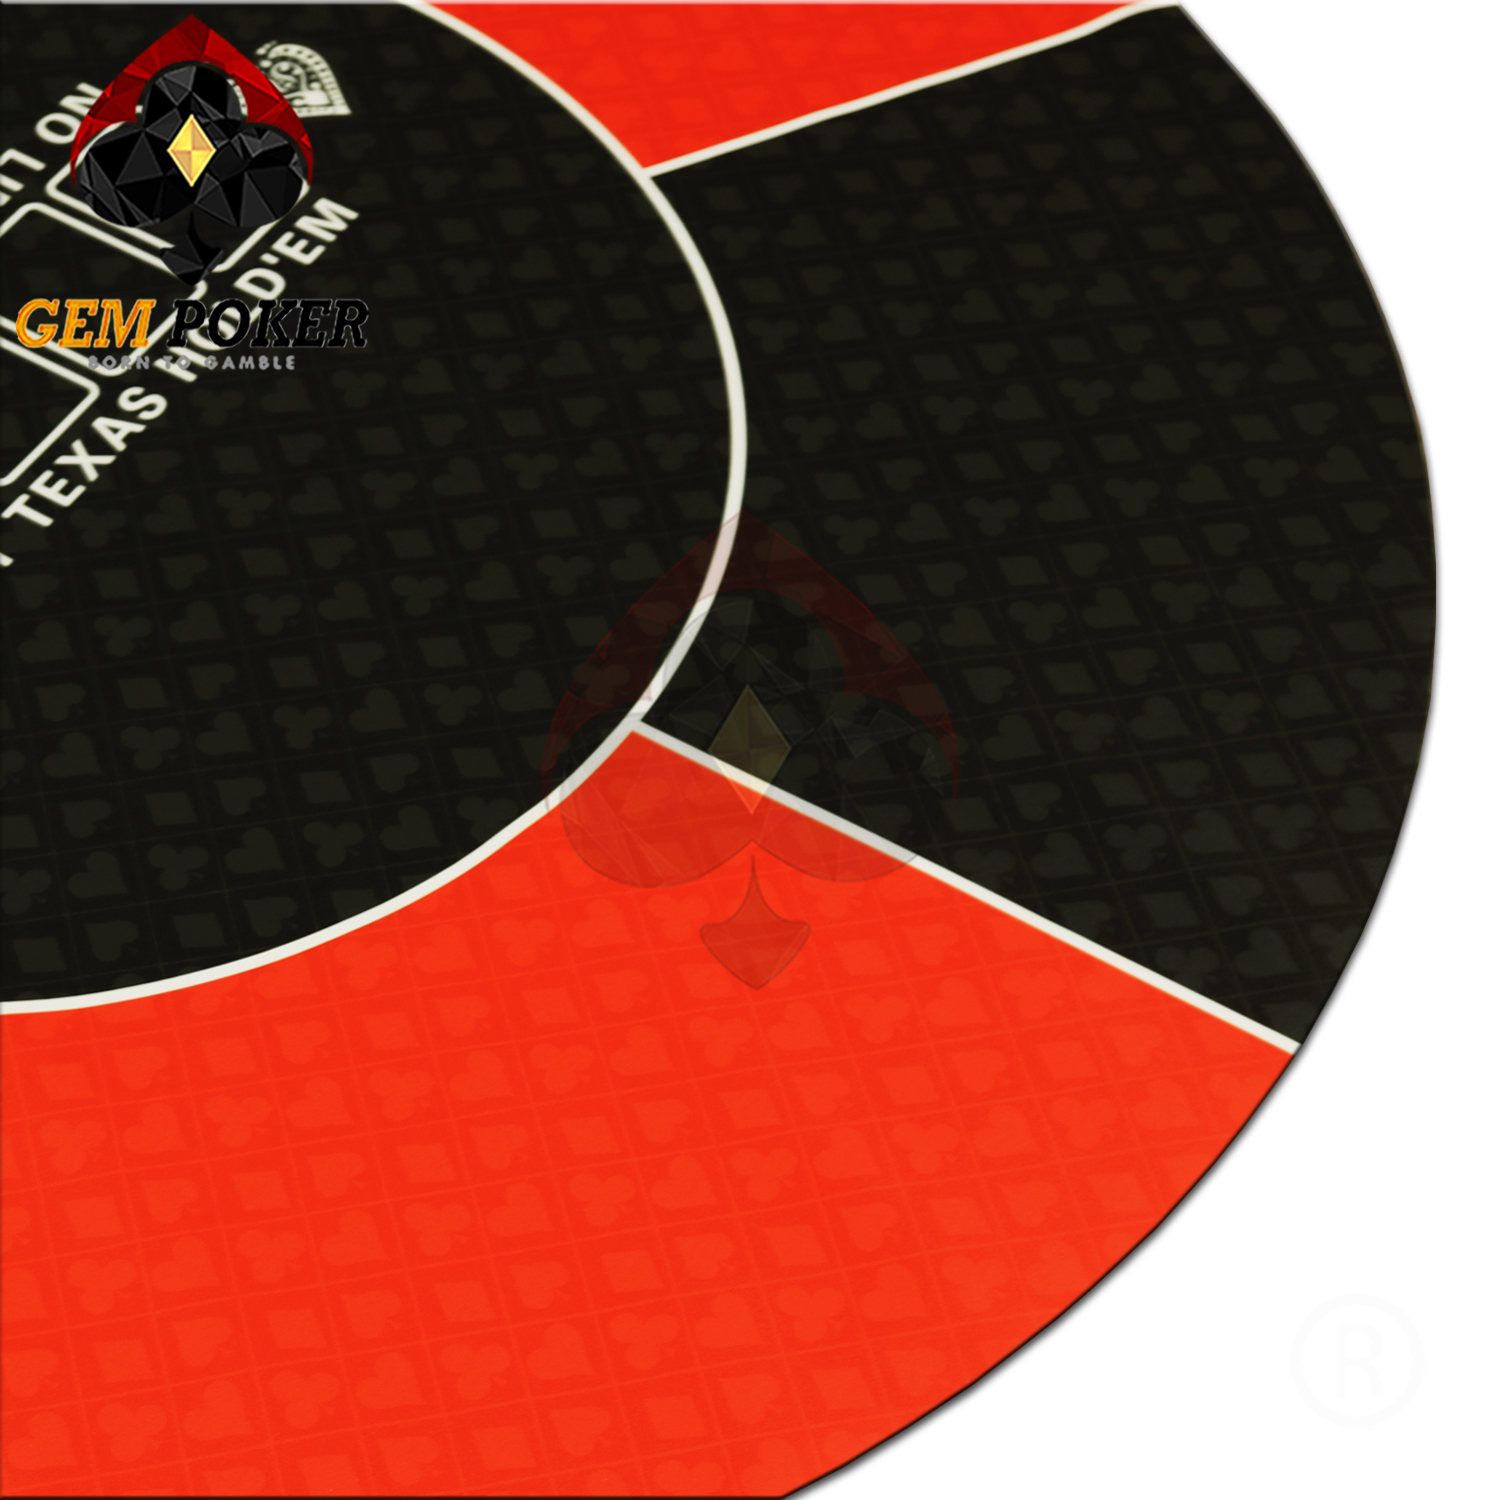 ROUND TEXAS POKER MAT RUBBER RED